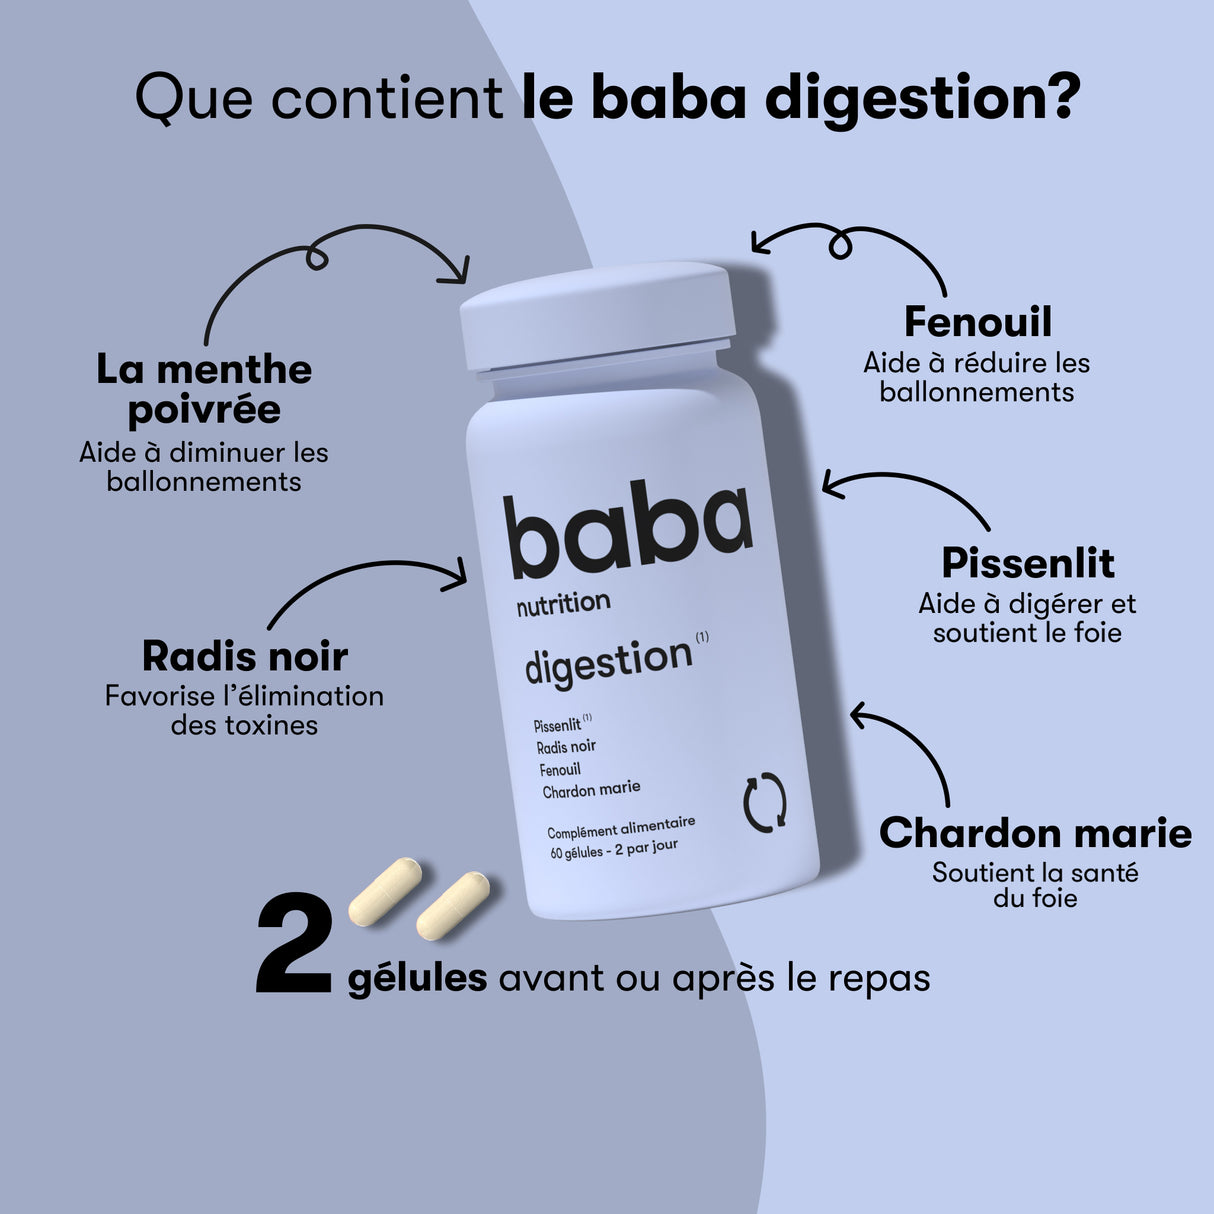 Digestion - 3 mois